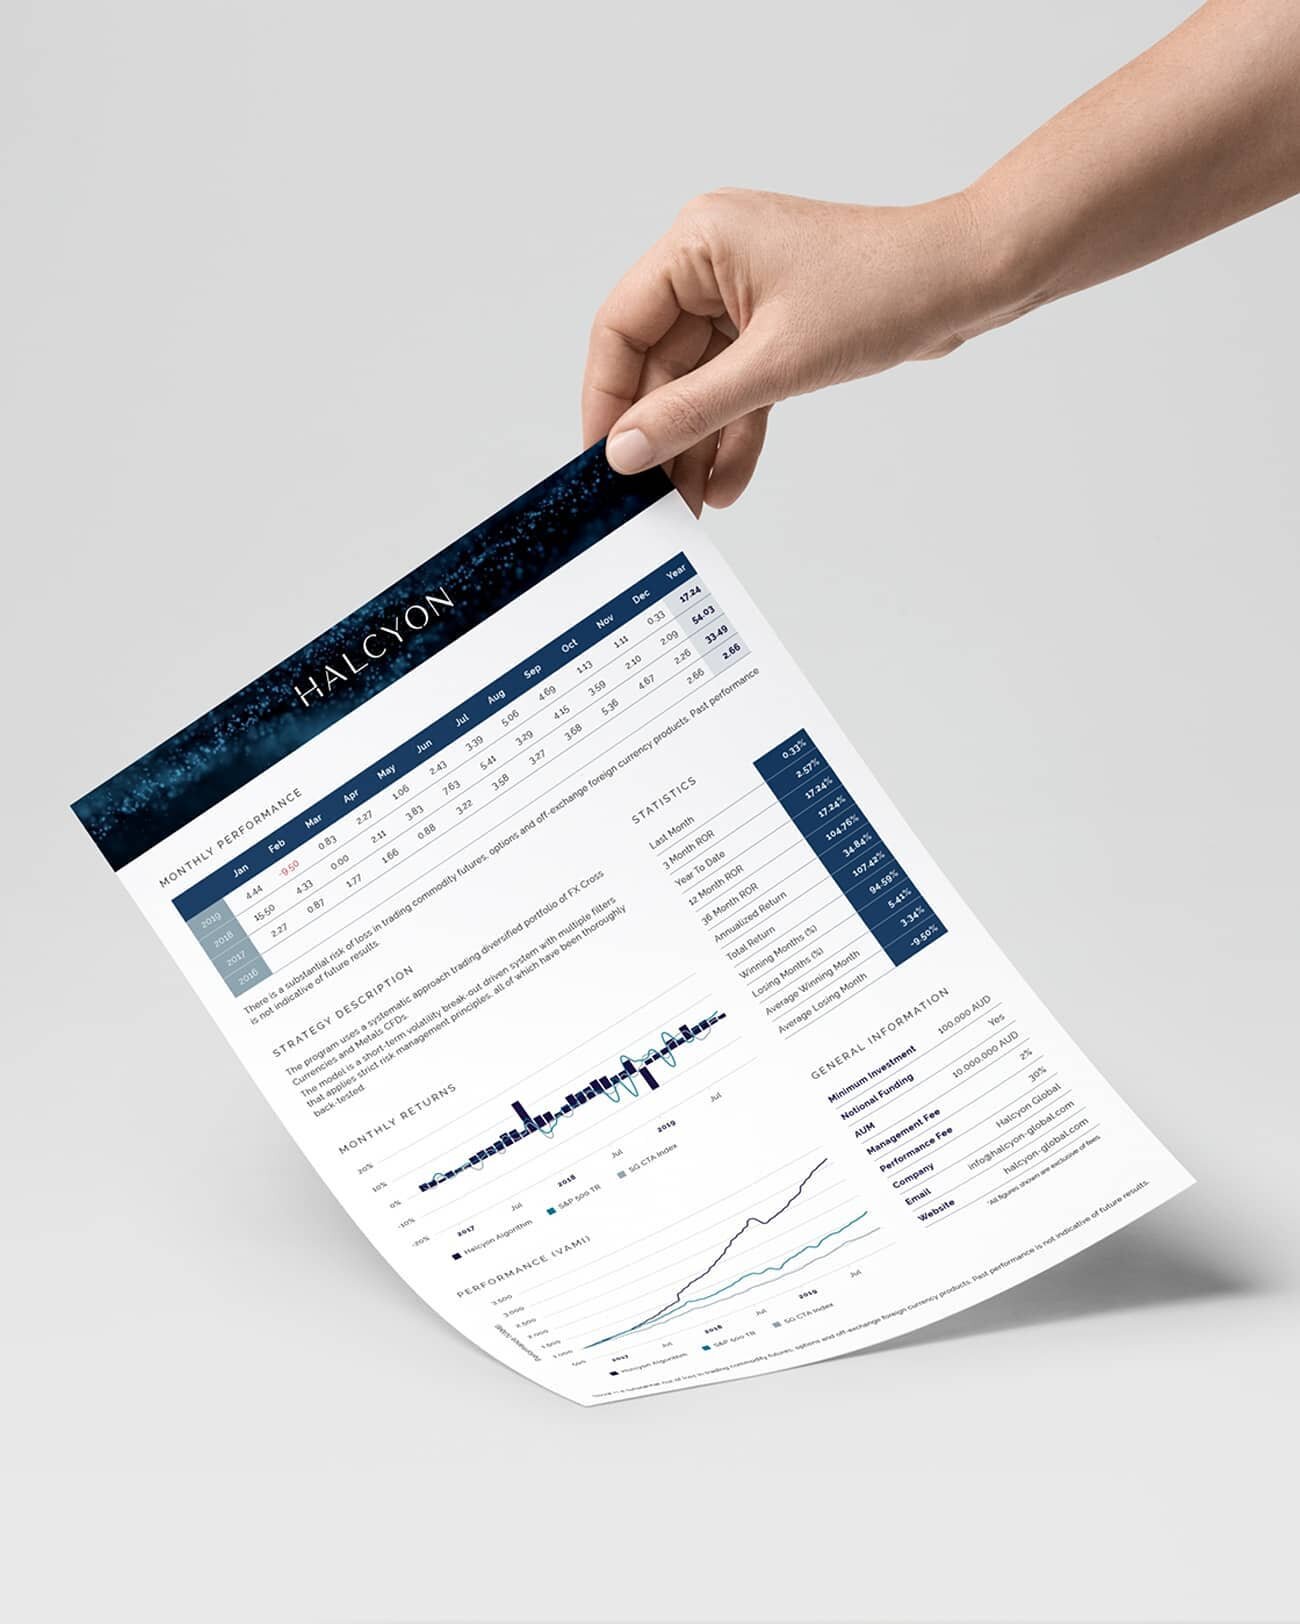 Monthly Performance Results Sheet for Halcyon Global designed by us @georgiaraycreative